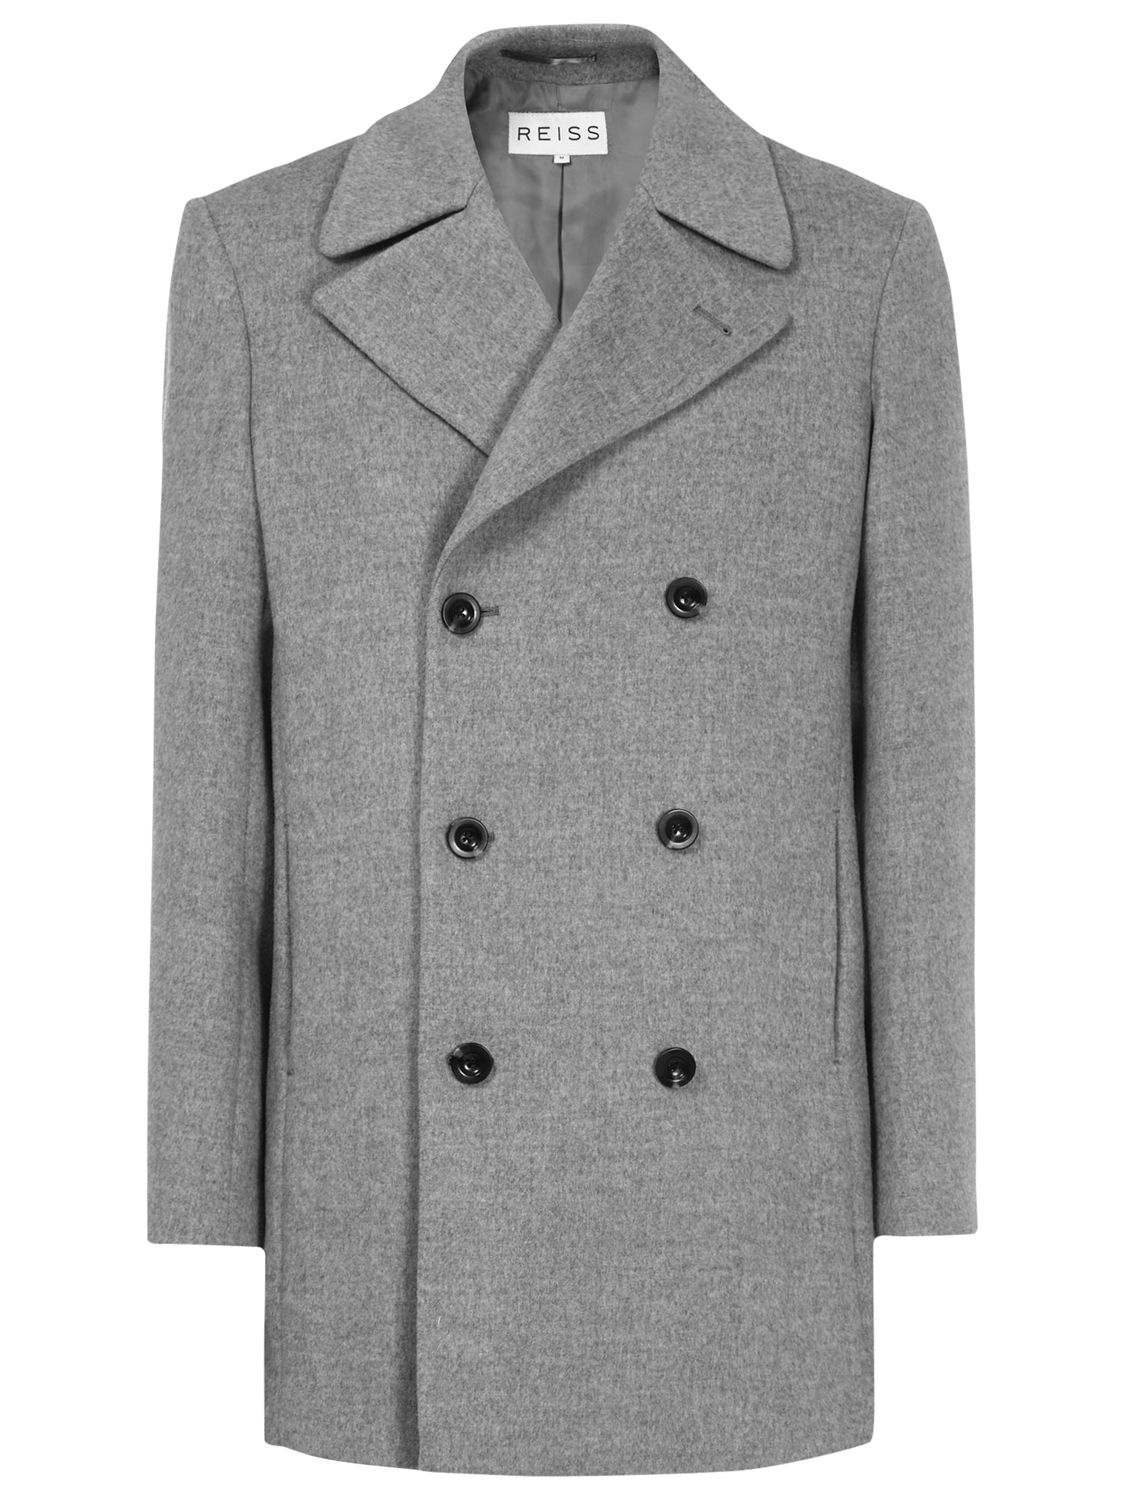 Buy Reiss Clooney Double Breasted Coat, Grey Online at johnlewis.com